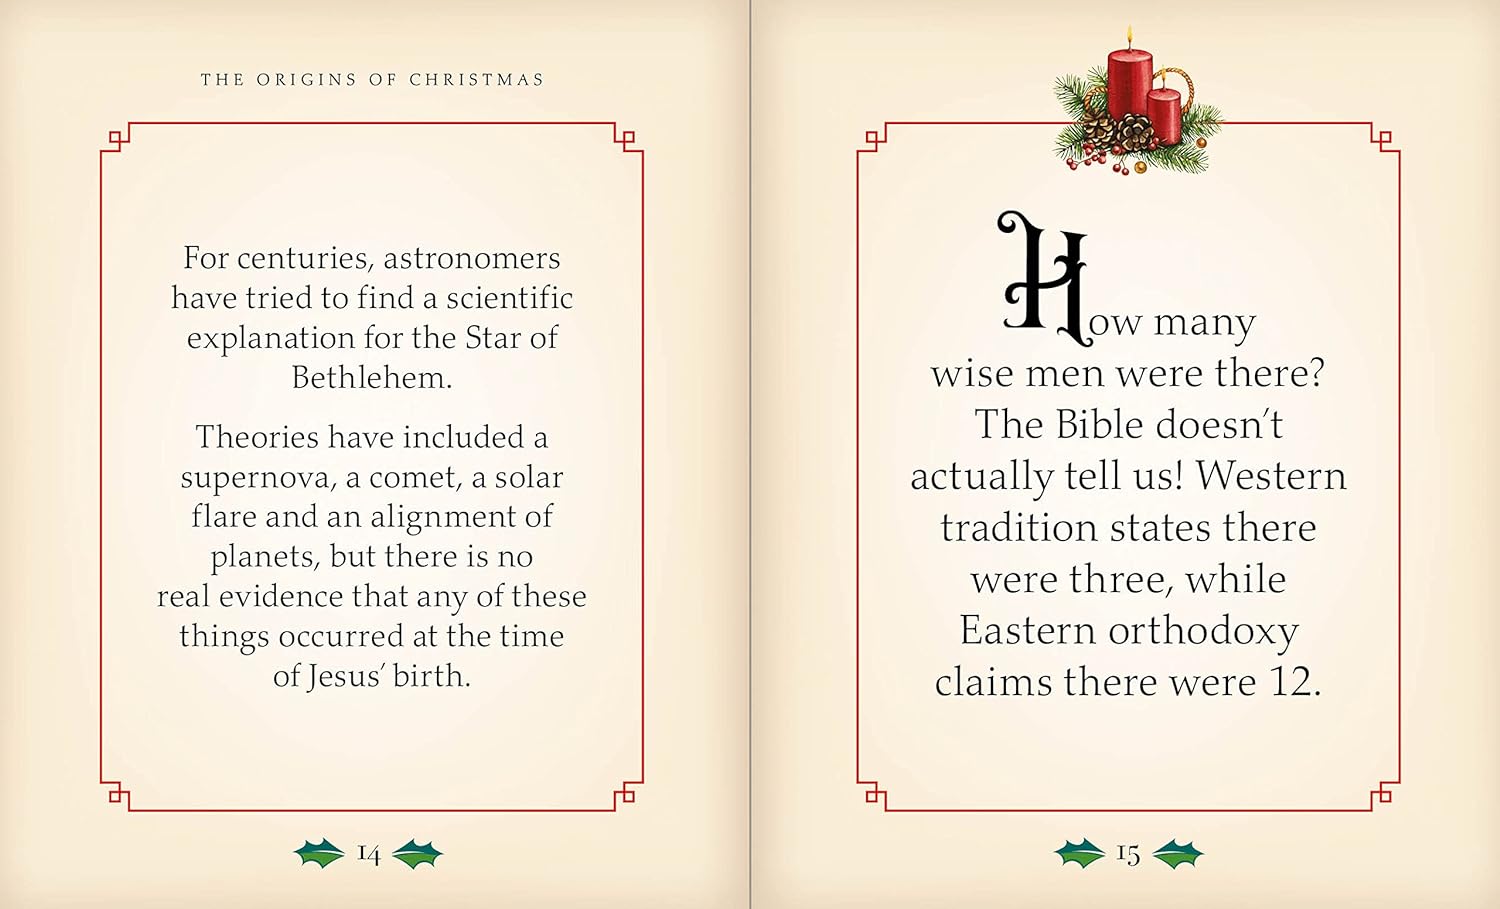 inside pages of book with Christmas trivia.